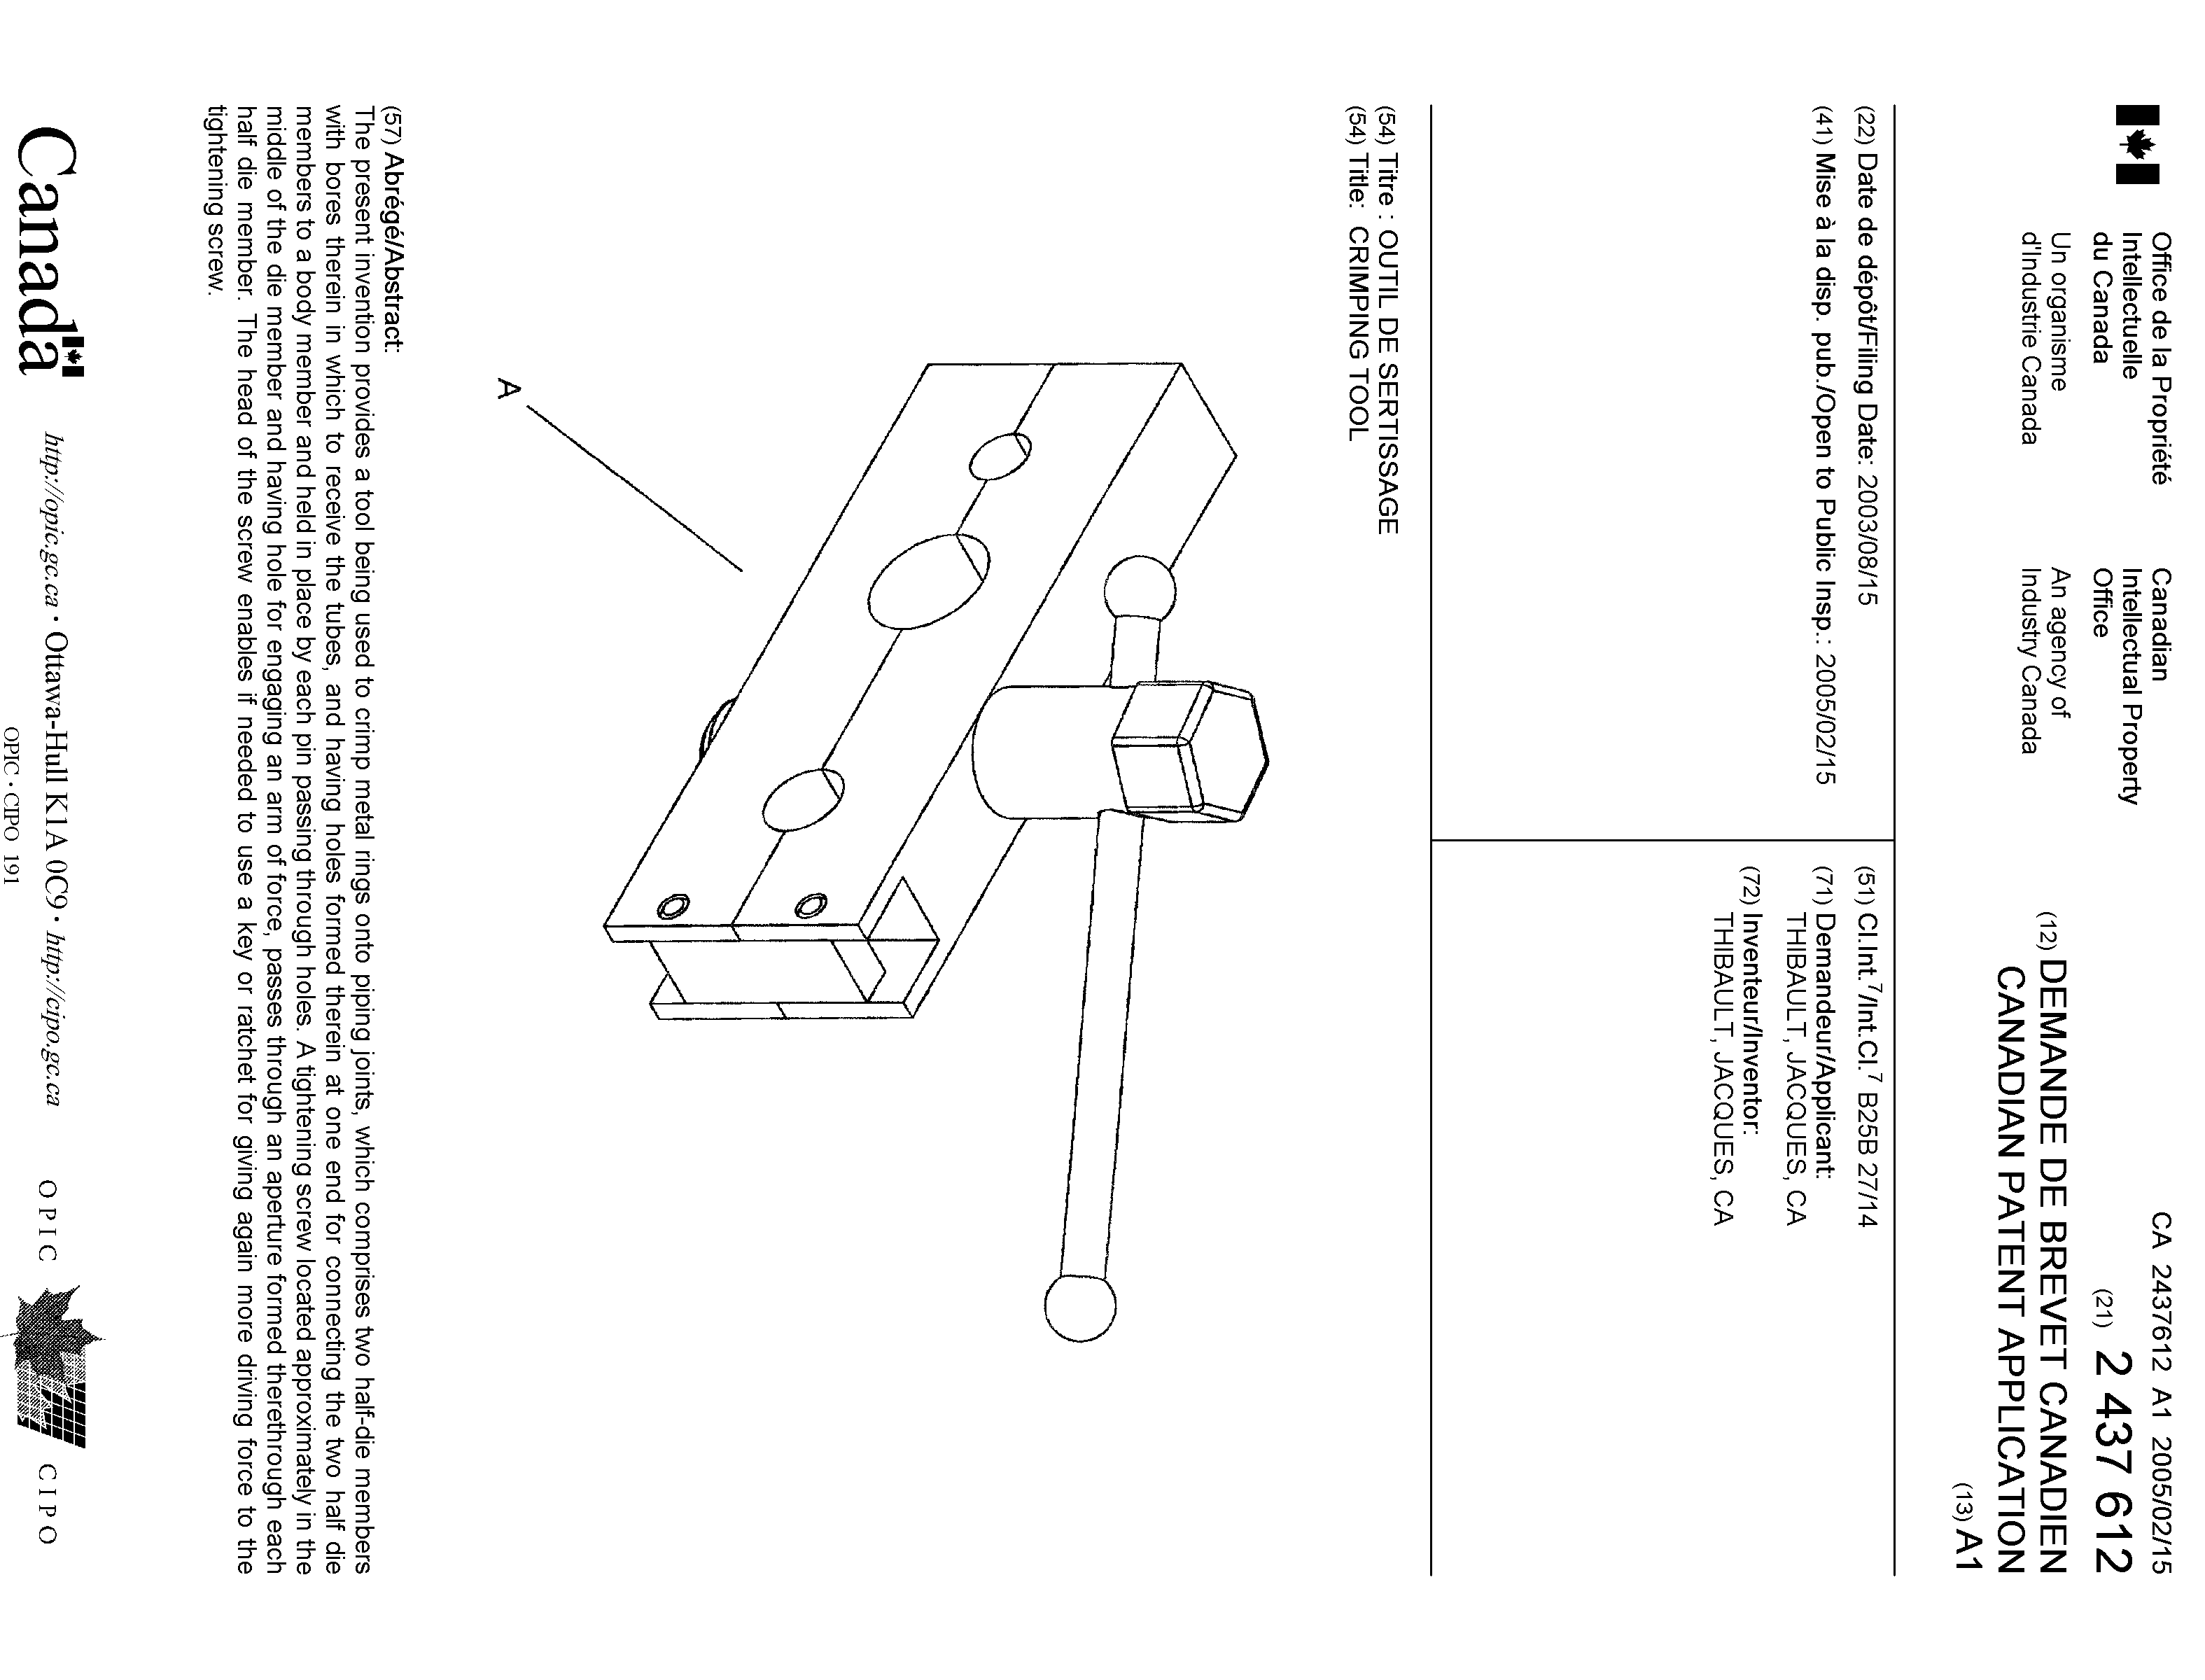 Canadian Patent Document 2437612. Cover Page 20041203. Image 1 of 1